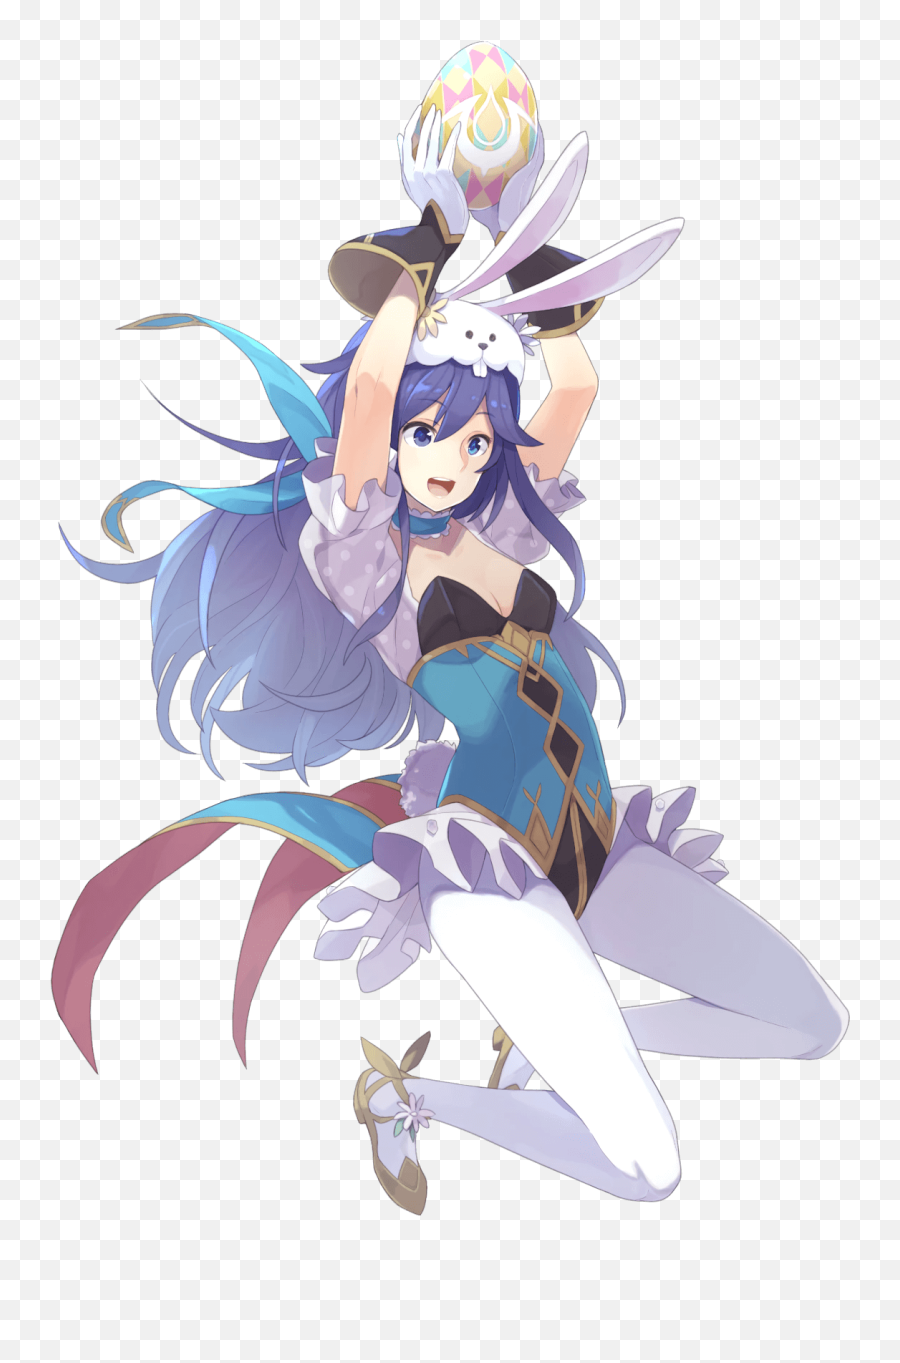 Download Does She Have A Better Chest Than Camilla Lucina Emoji,Lucina Transparent